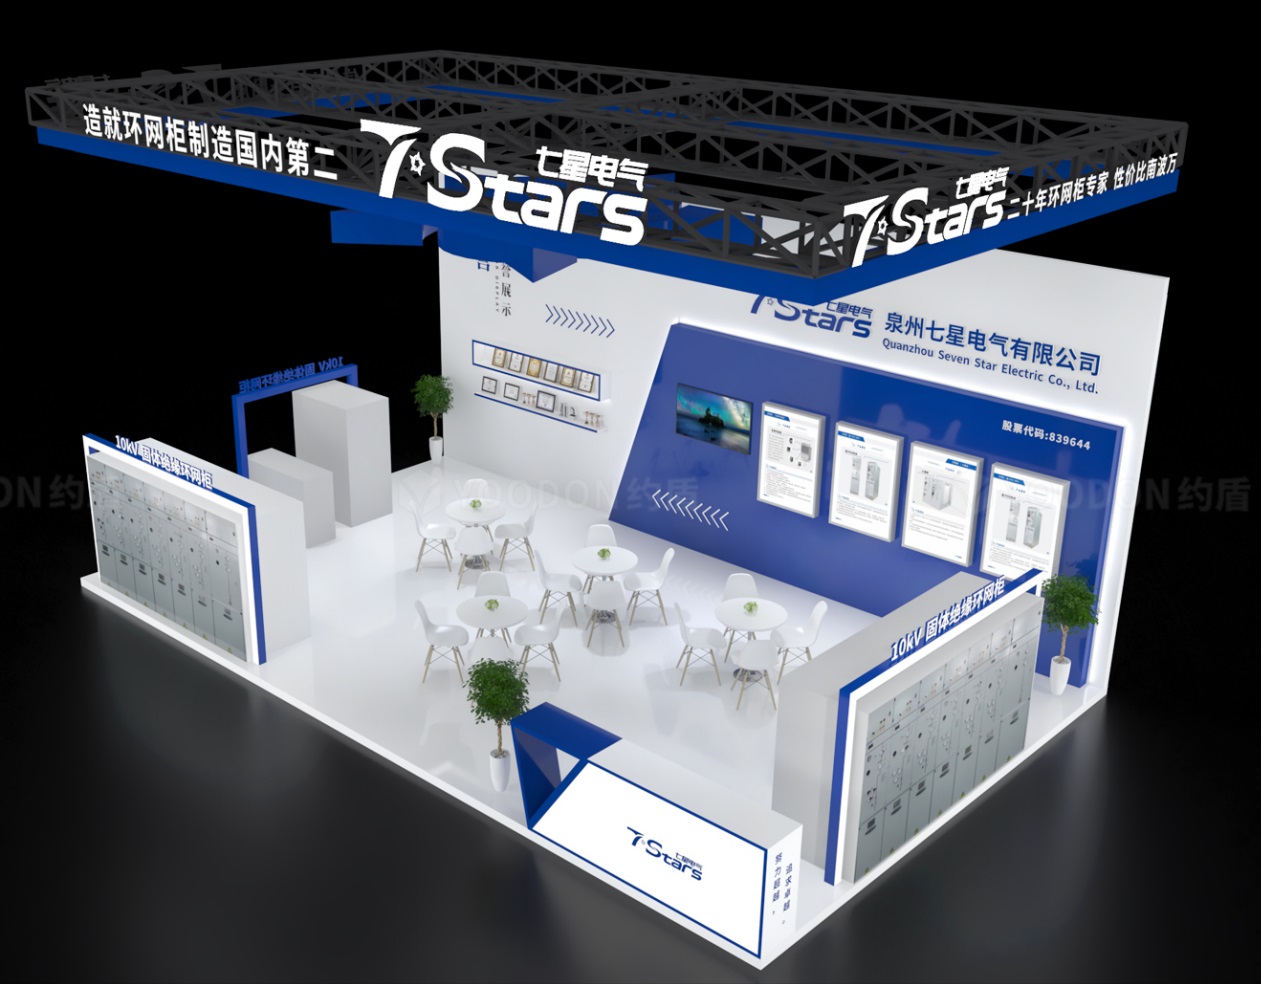 Quanzhou Seven Stars Electric appeared at the Shanghai EP Electric Power Exhibition, displaying its latest products, water-immersed ring main cabinets and small low cabinets – the booth numbe...